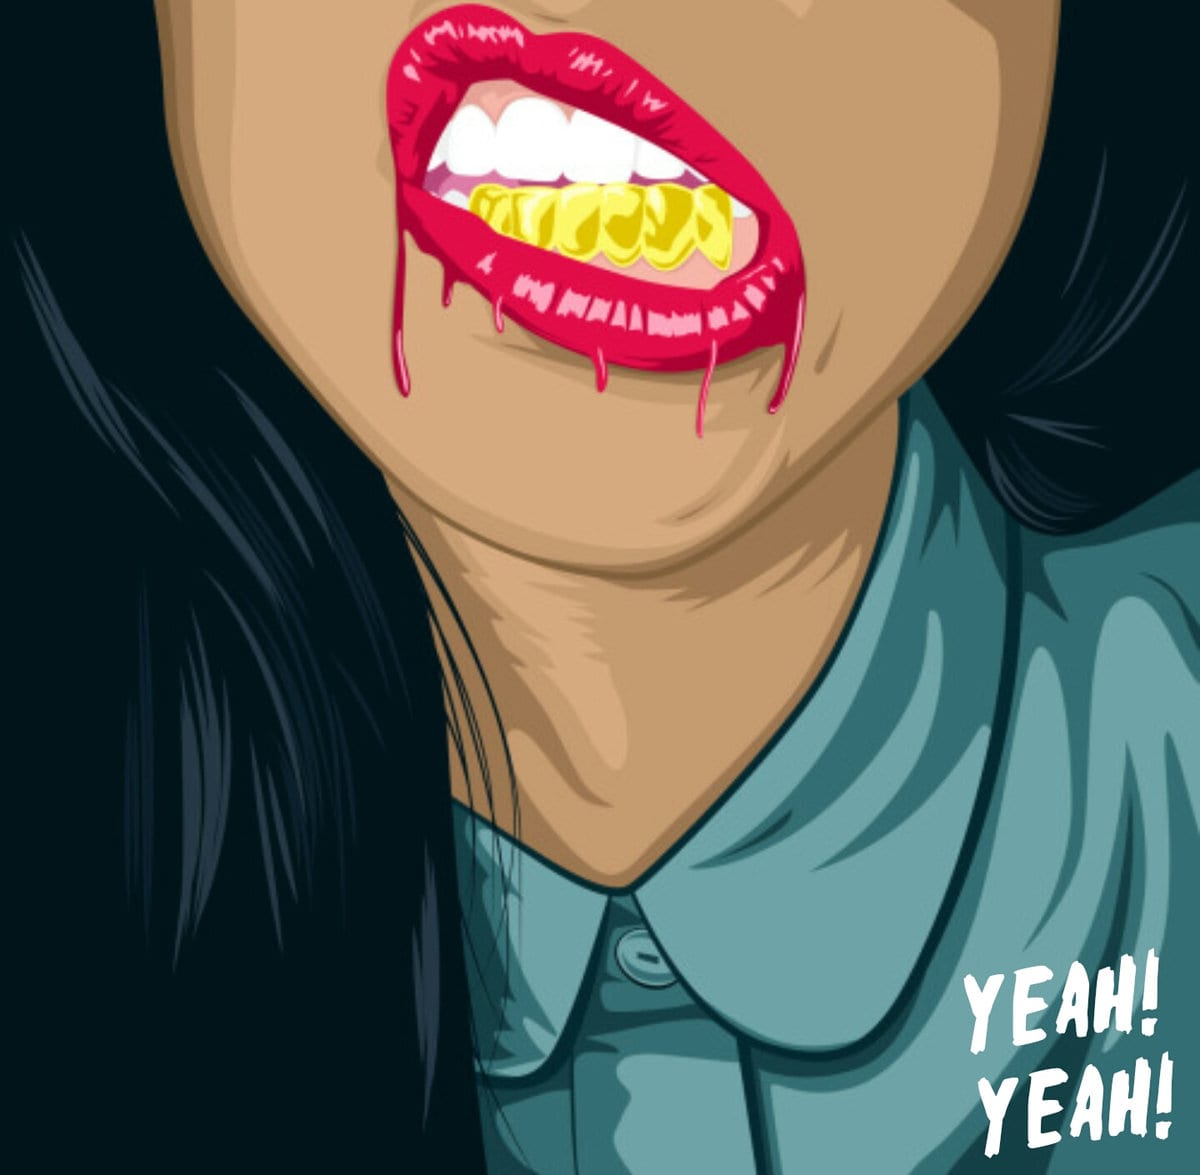 New Single By Young Jay - Yeah! Yeah!